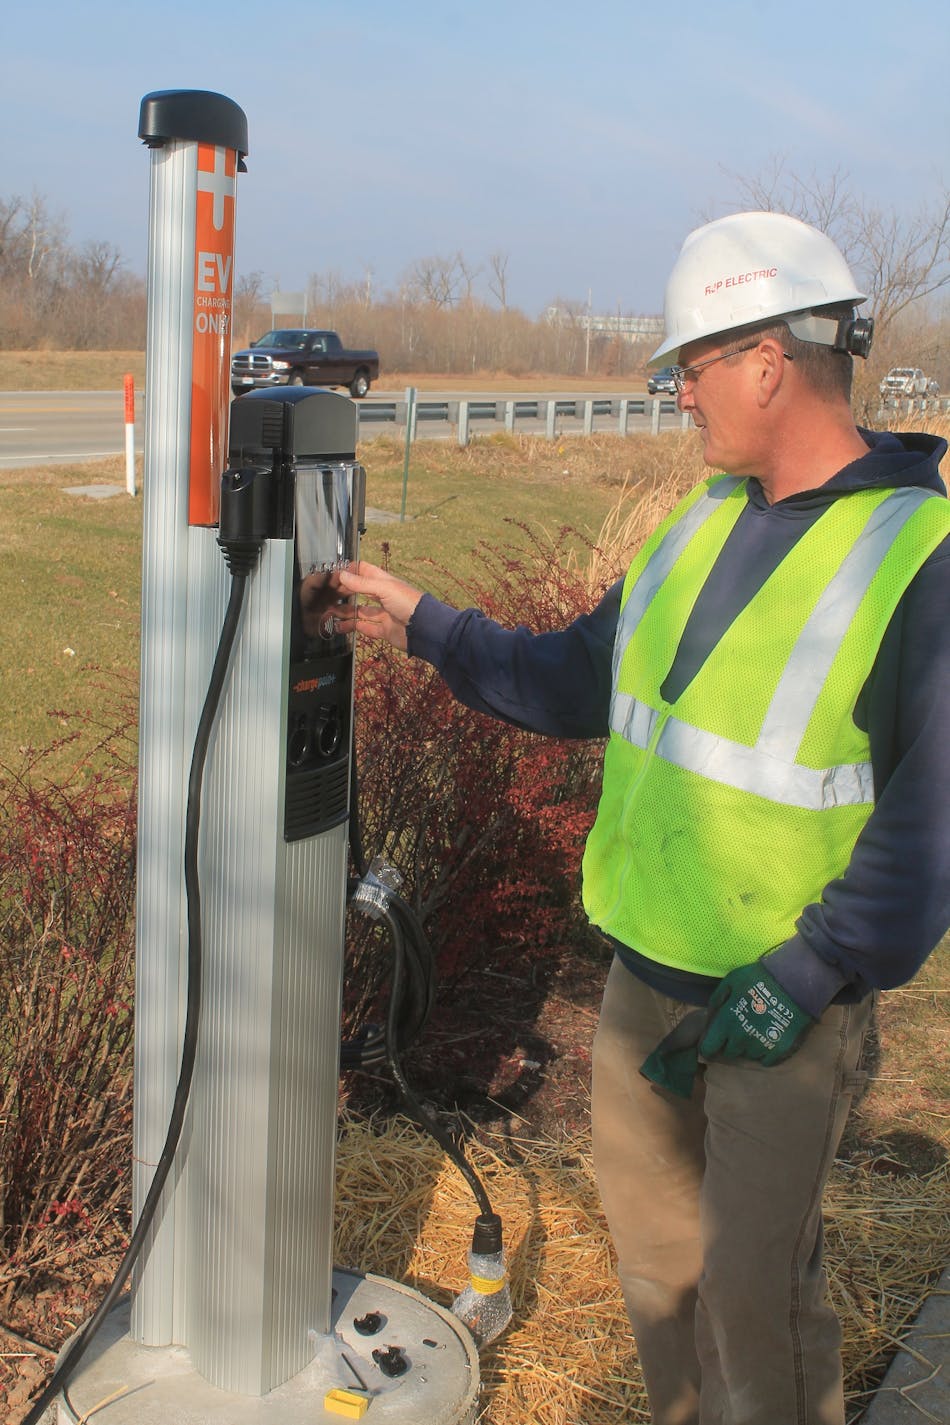 An RJP Electric worker puts the finishing touches on an EV charging station installed at a St. Charles County (Mo.) Economic Development Center facility.